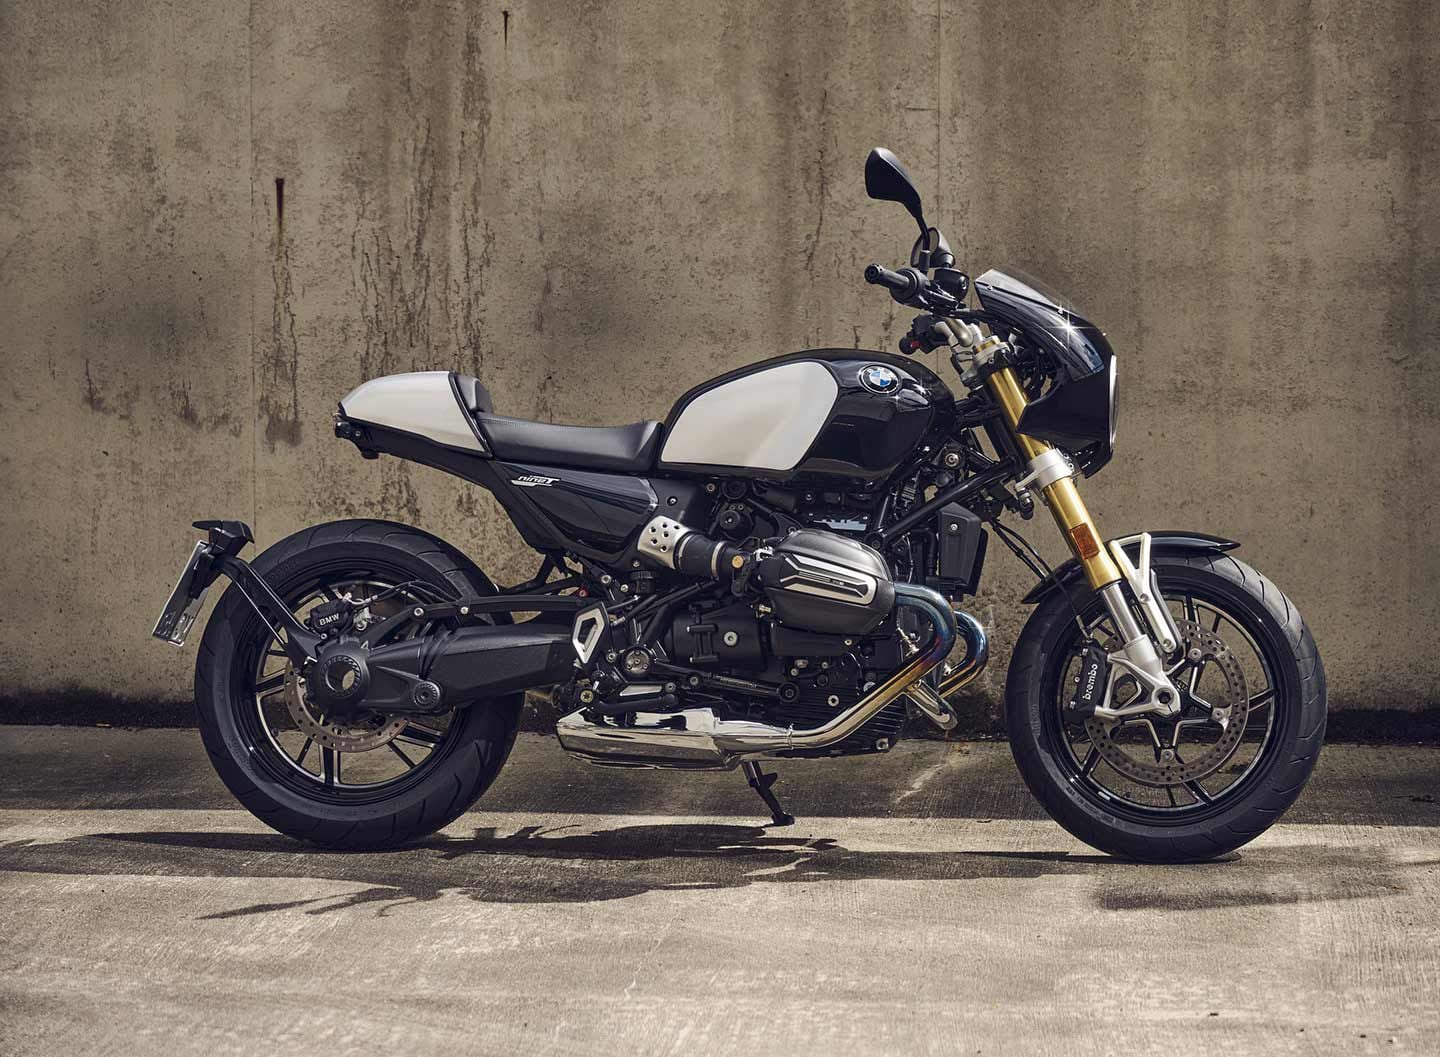 The 2024 R 12 nineT roadster offers adjustability on its 45mm fork, and gets a different tank than the R 12 cruiser, recalling /5 models of the ’70s.